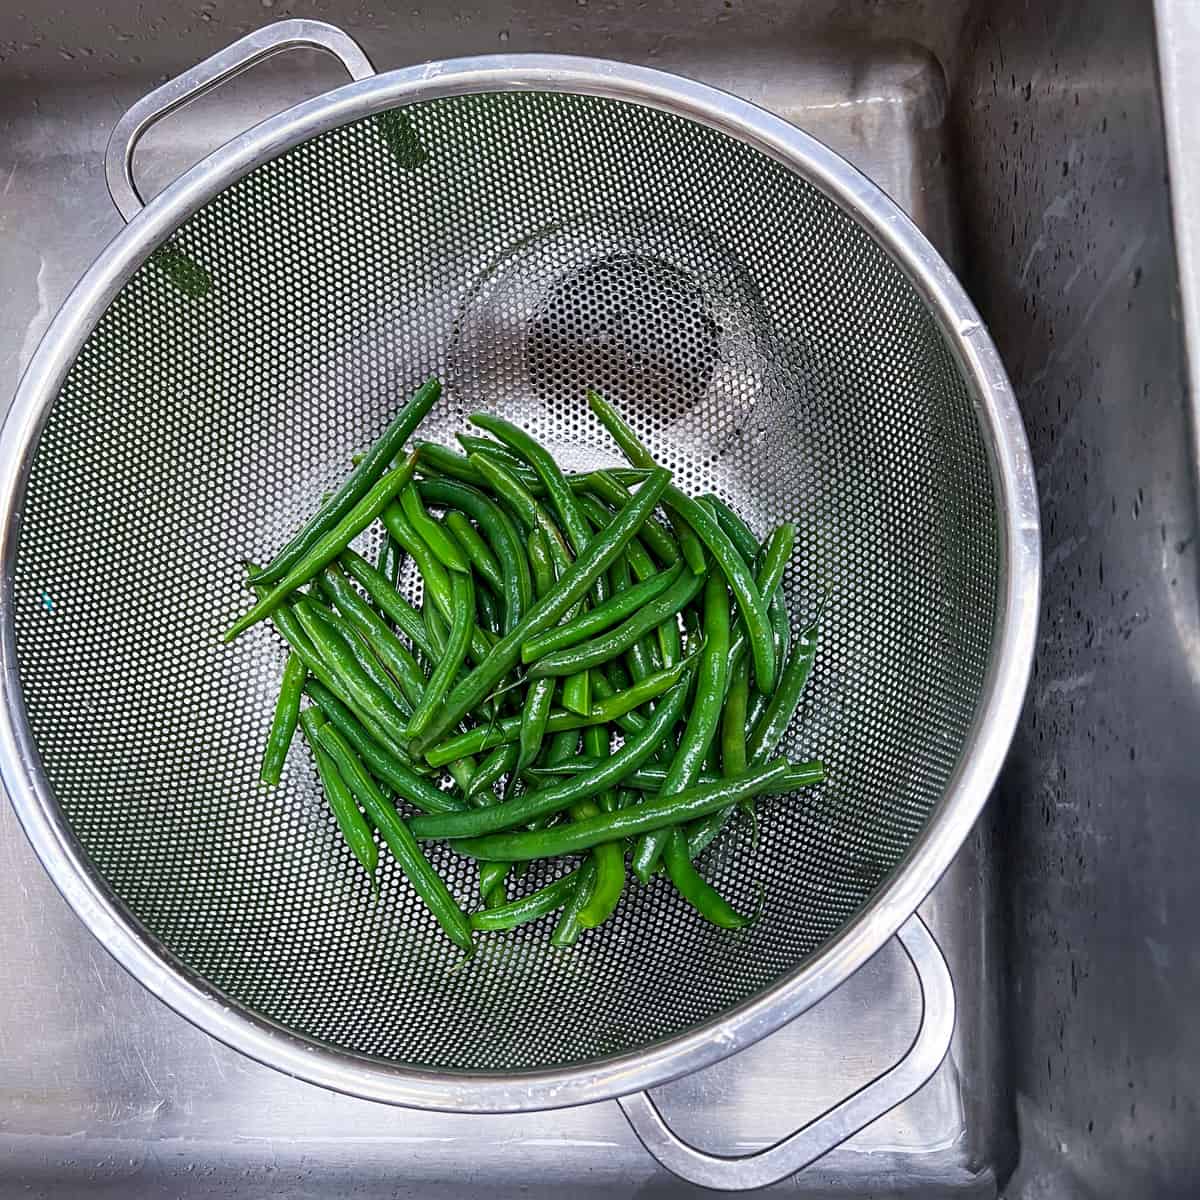 blanched green beans draining in a colander in the sink.